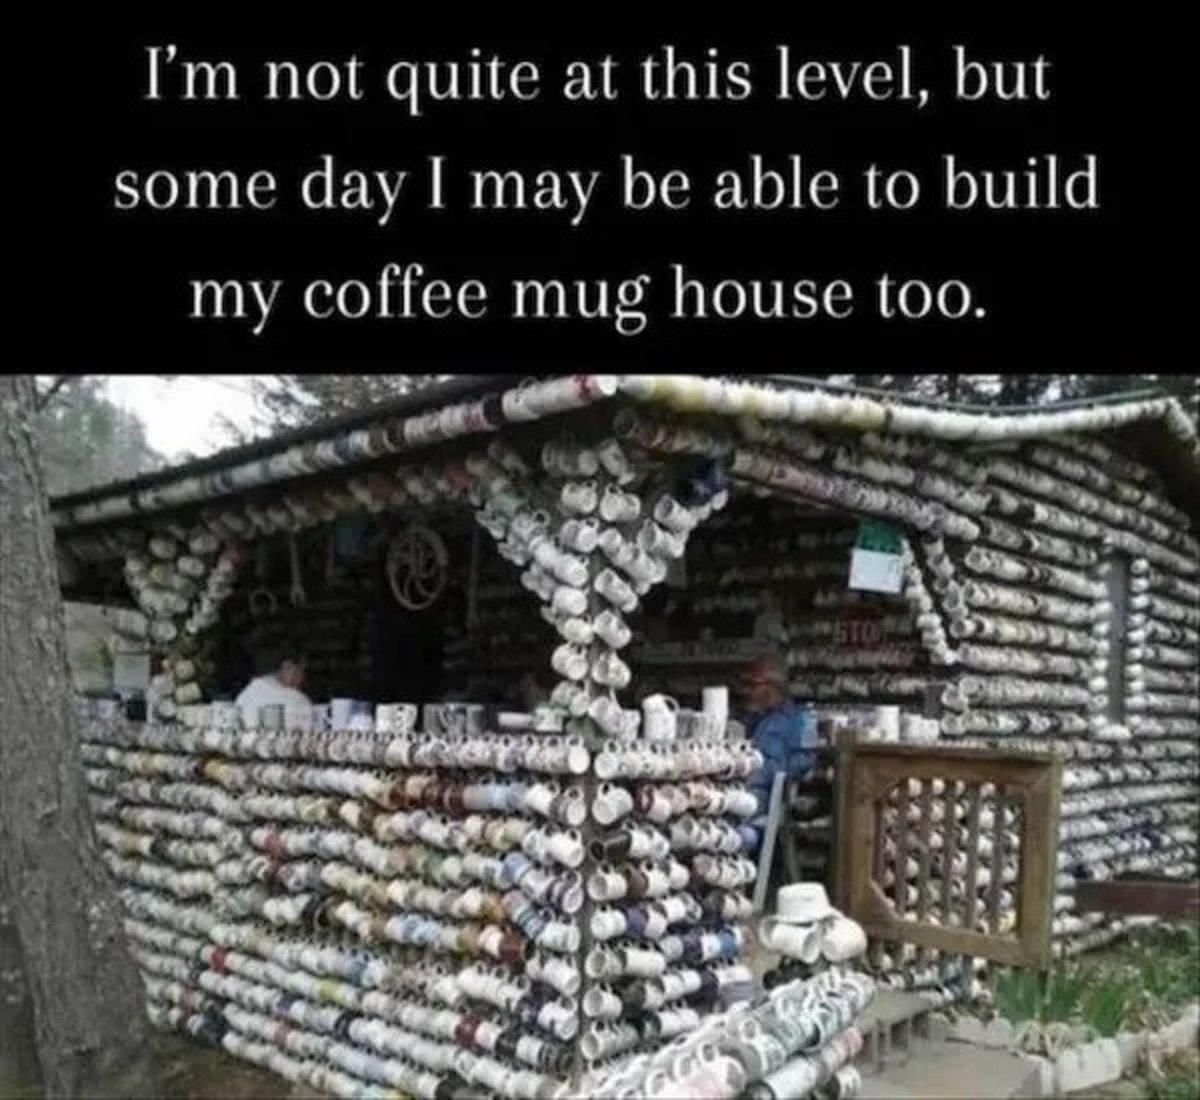 house of mugs - I'm not quite at this level, but some day I may be able to build my coffee mug house too.